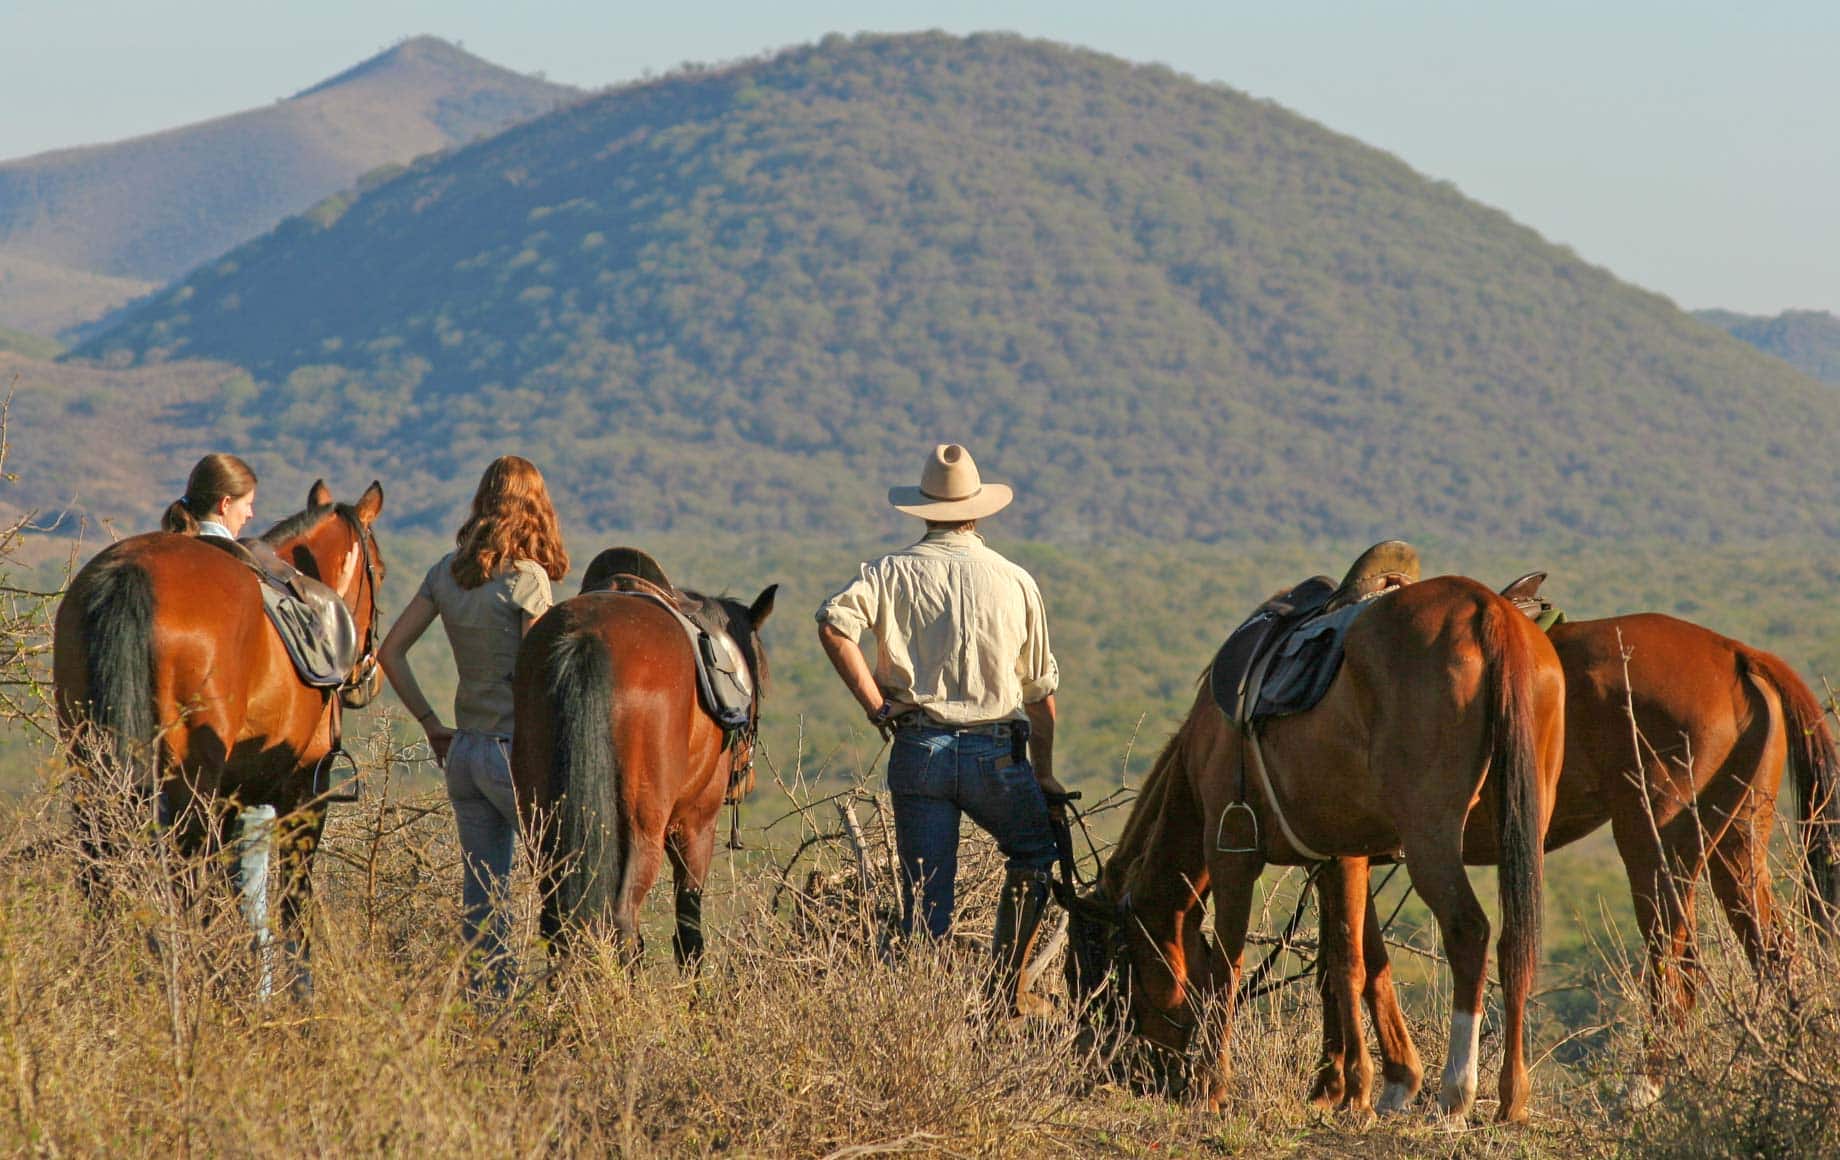 Horseback riding out in the open African Safari